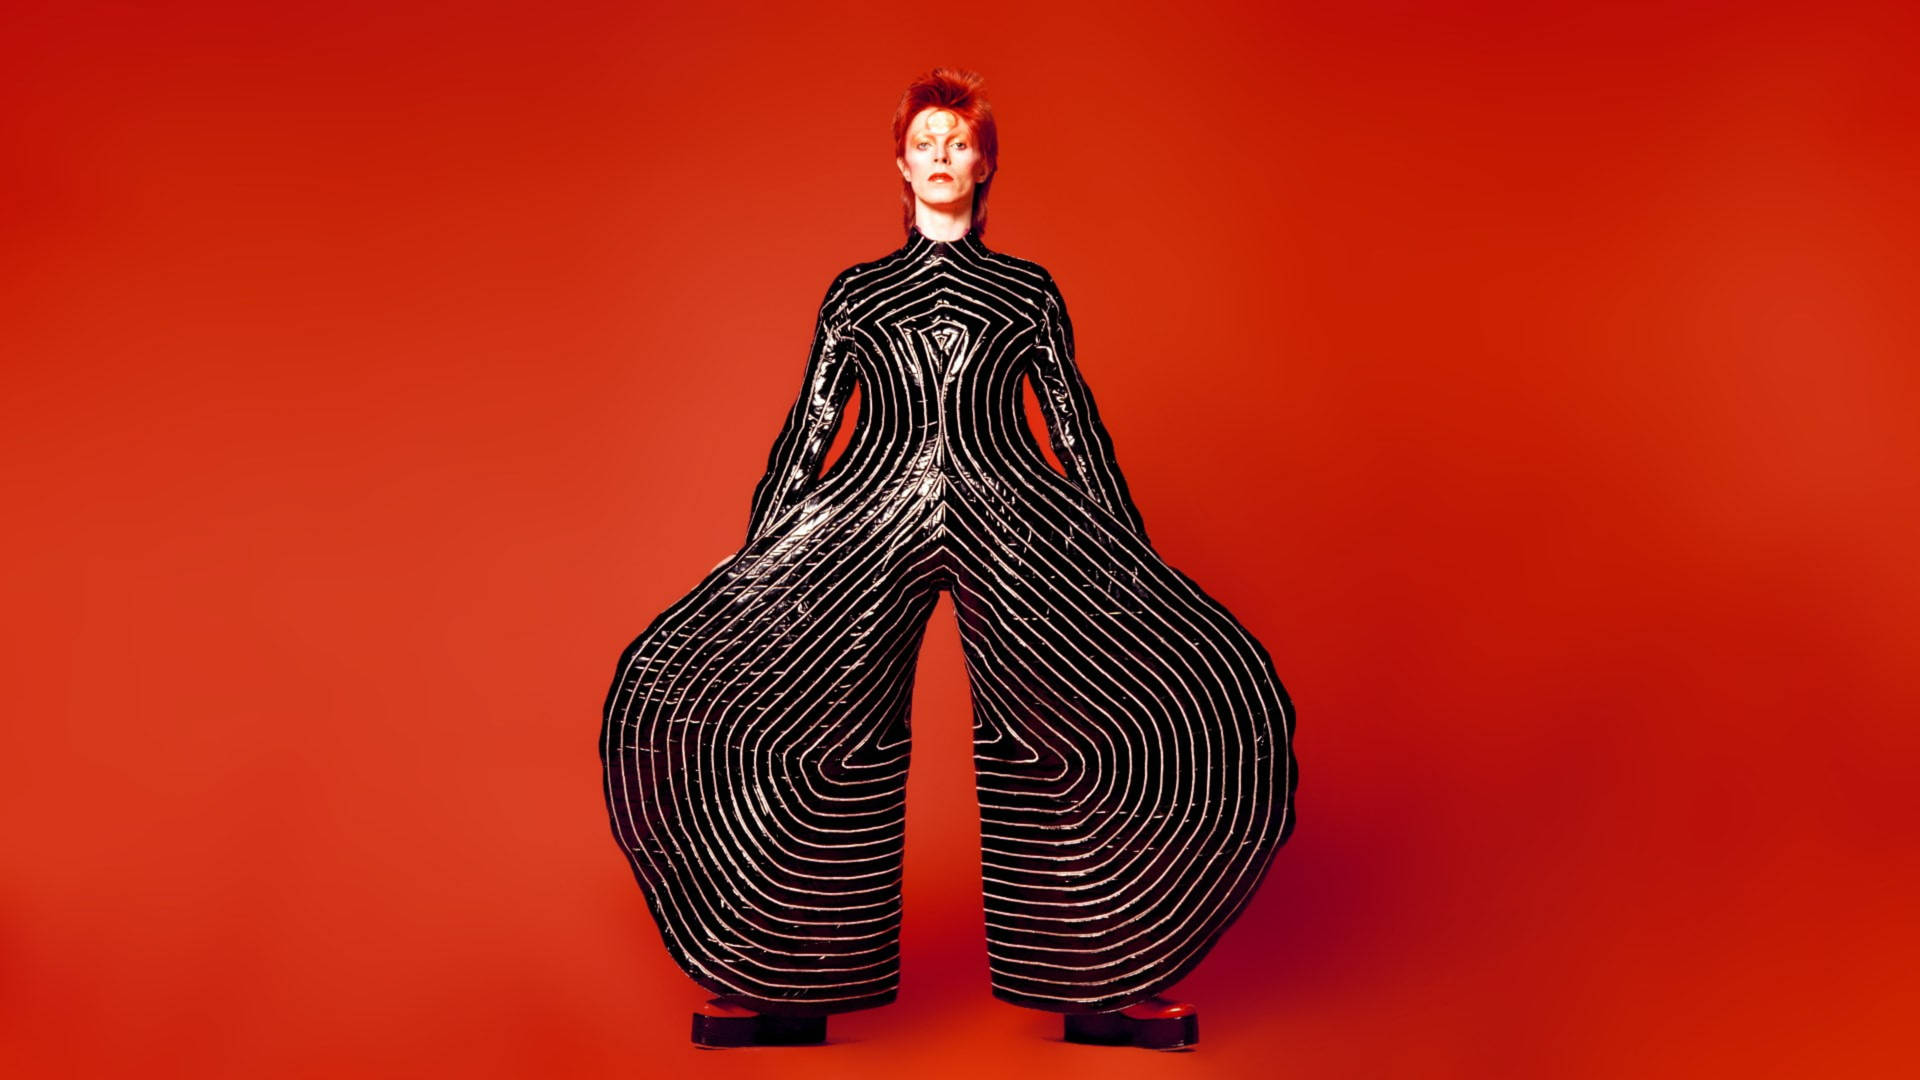 David Bowie Stripes In Red Wallpaper